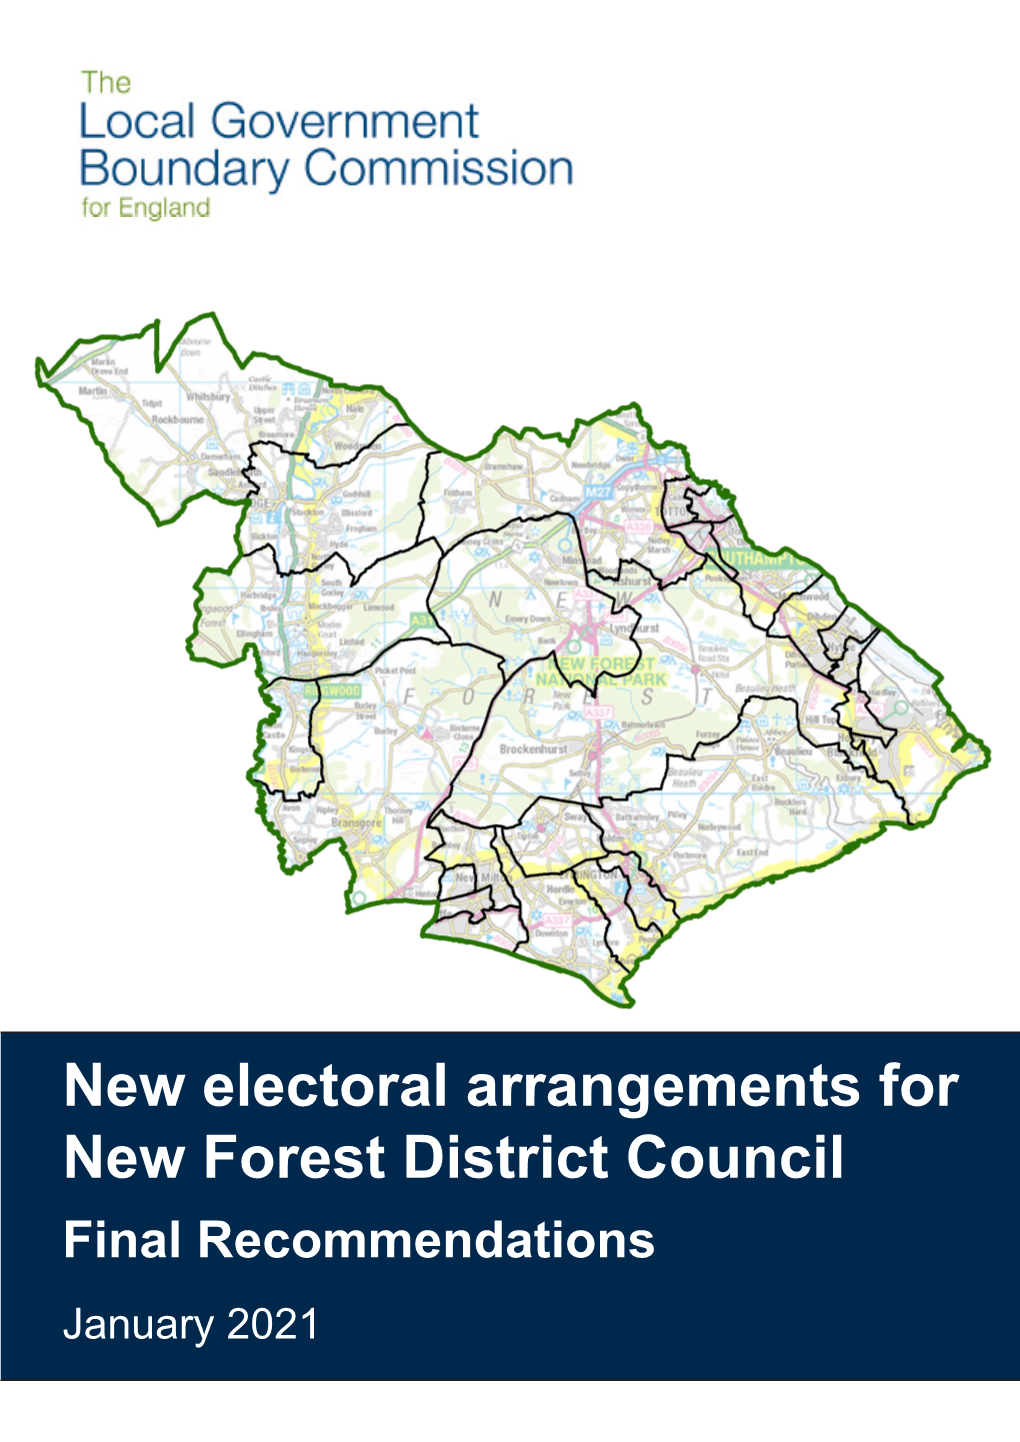 Final Recommendations Report for New Forest District Council